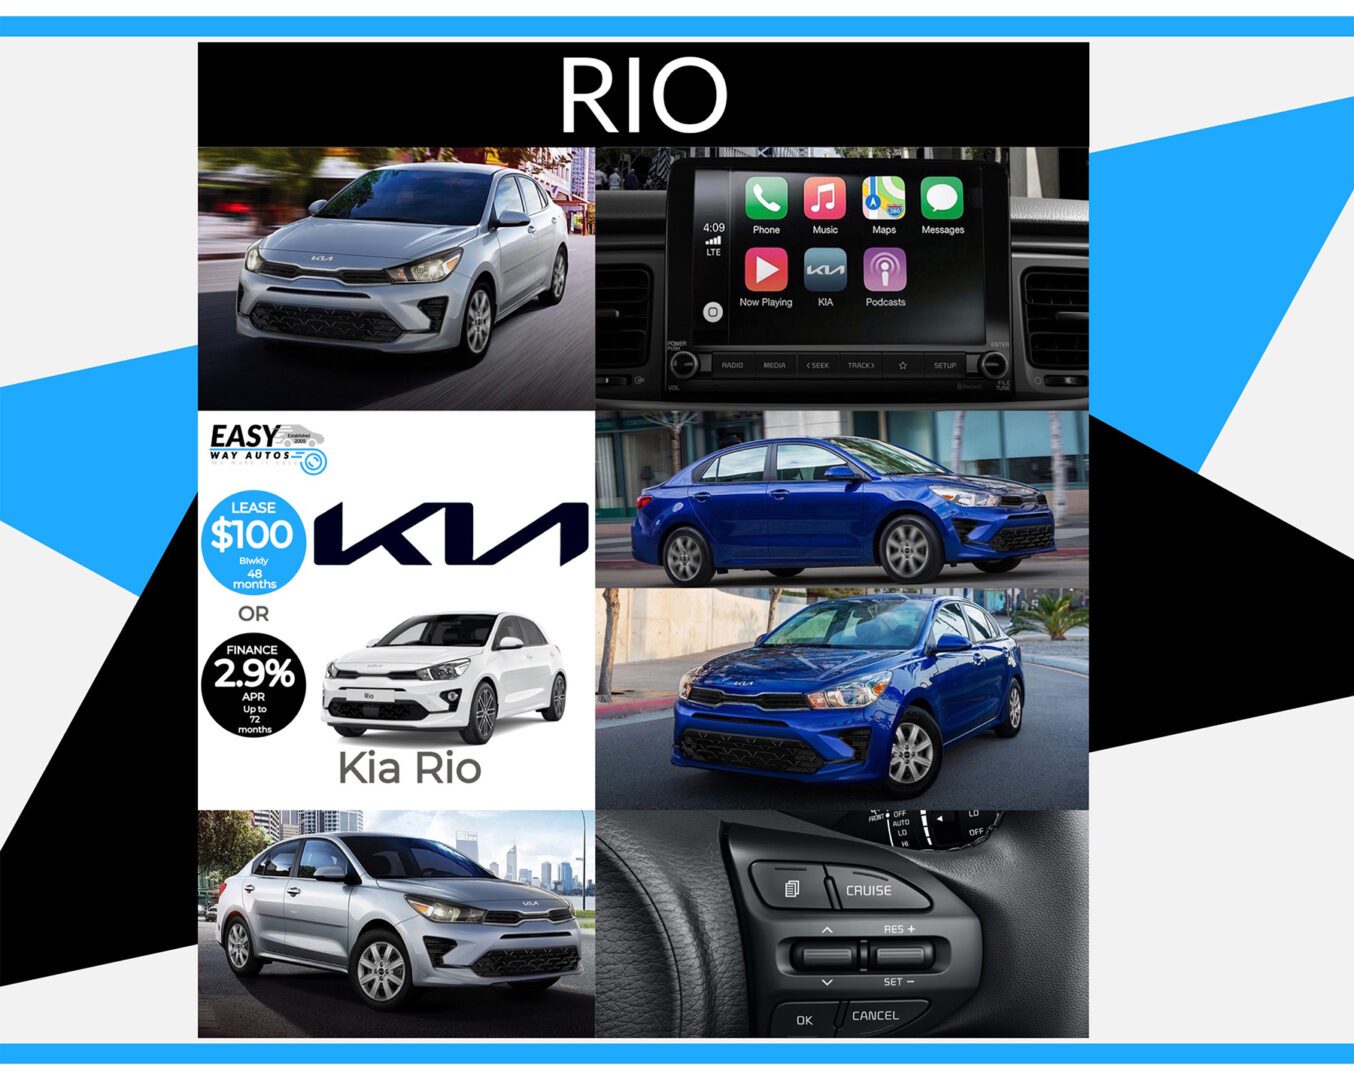 The 2019 kia rio is shown on a blue background.